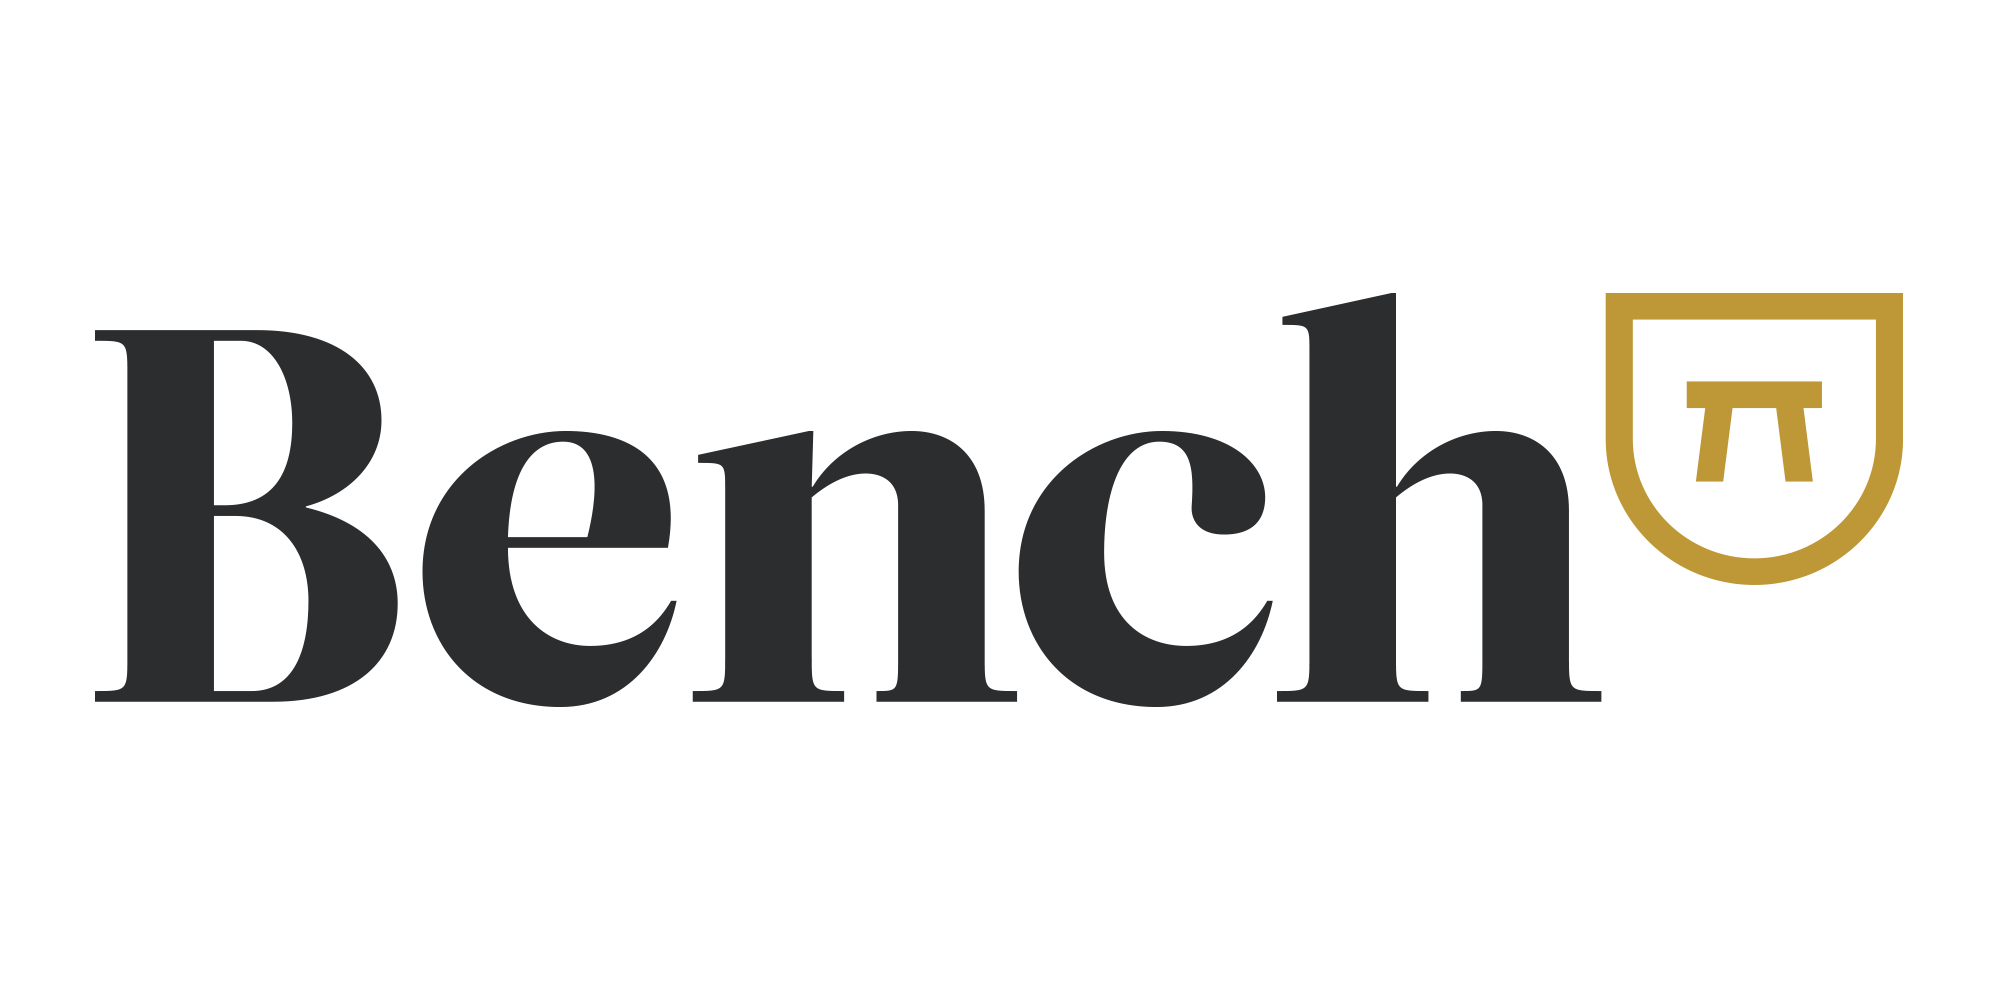 Bench is part of the Vancouver Tech Showcase | #VanStartupCity | Vancouver Startup City: Capital